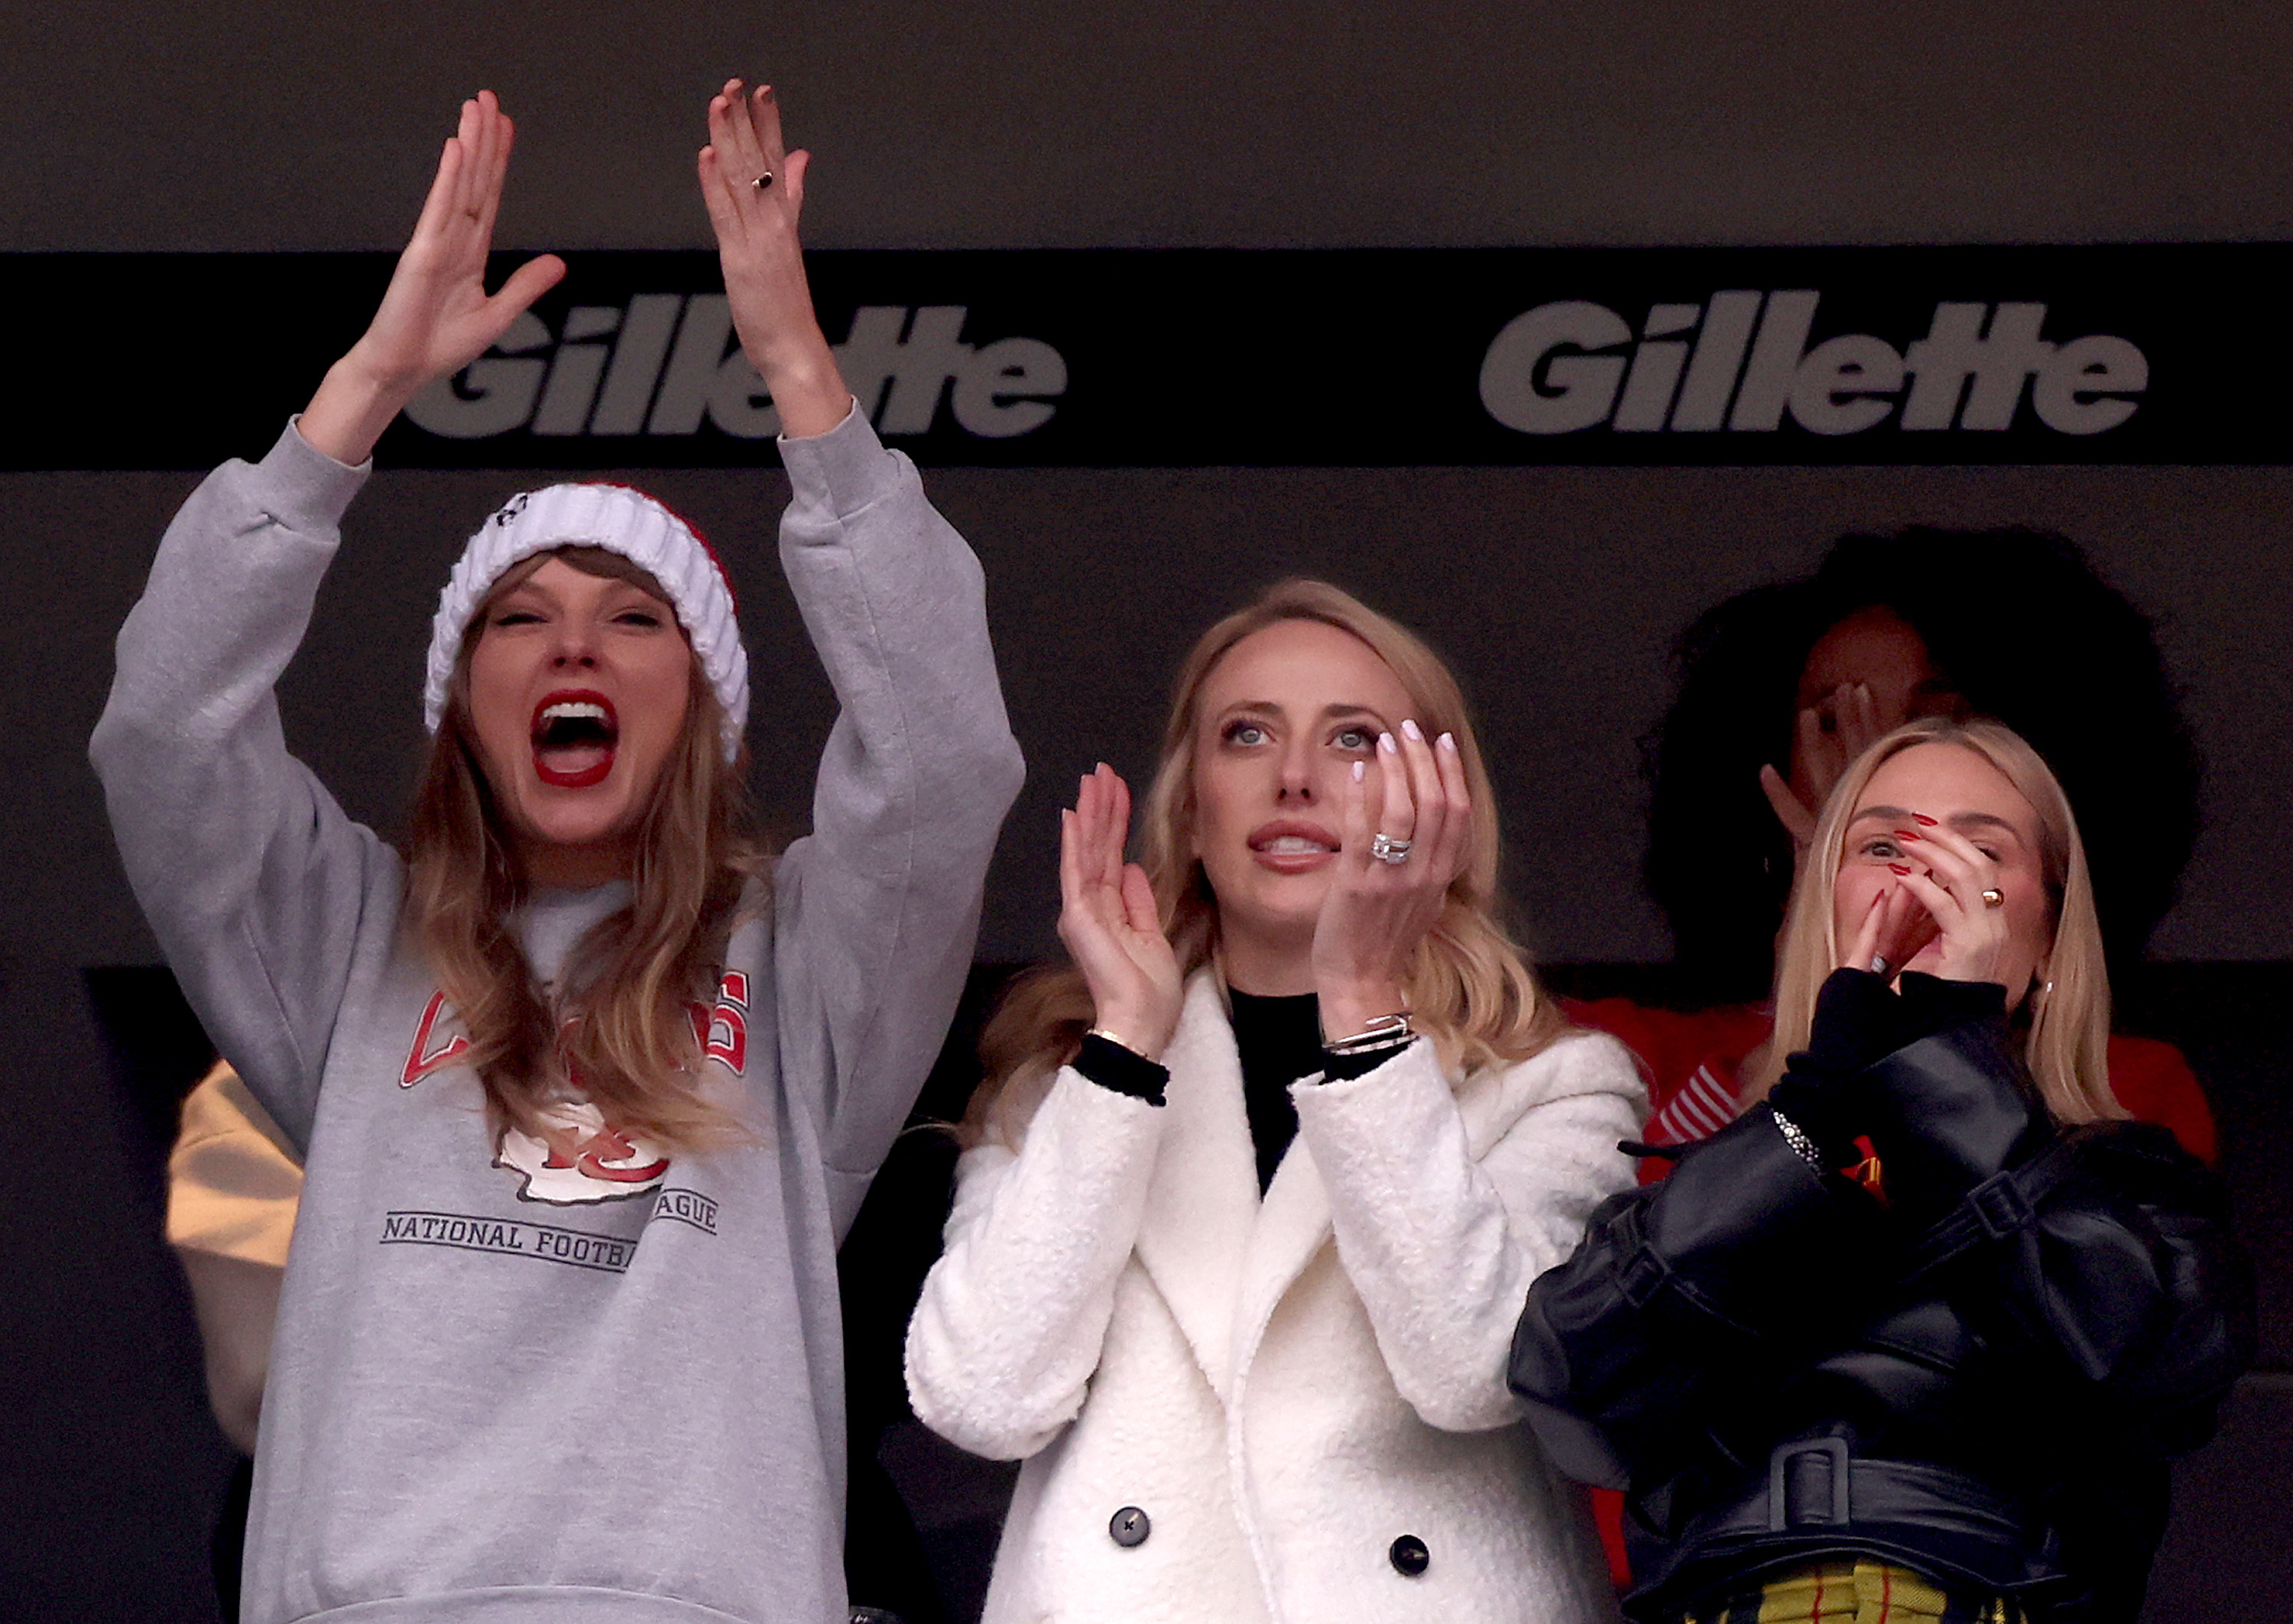 Taylor Swift and Brittany Mahomes cheering in the crowd